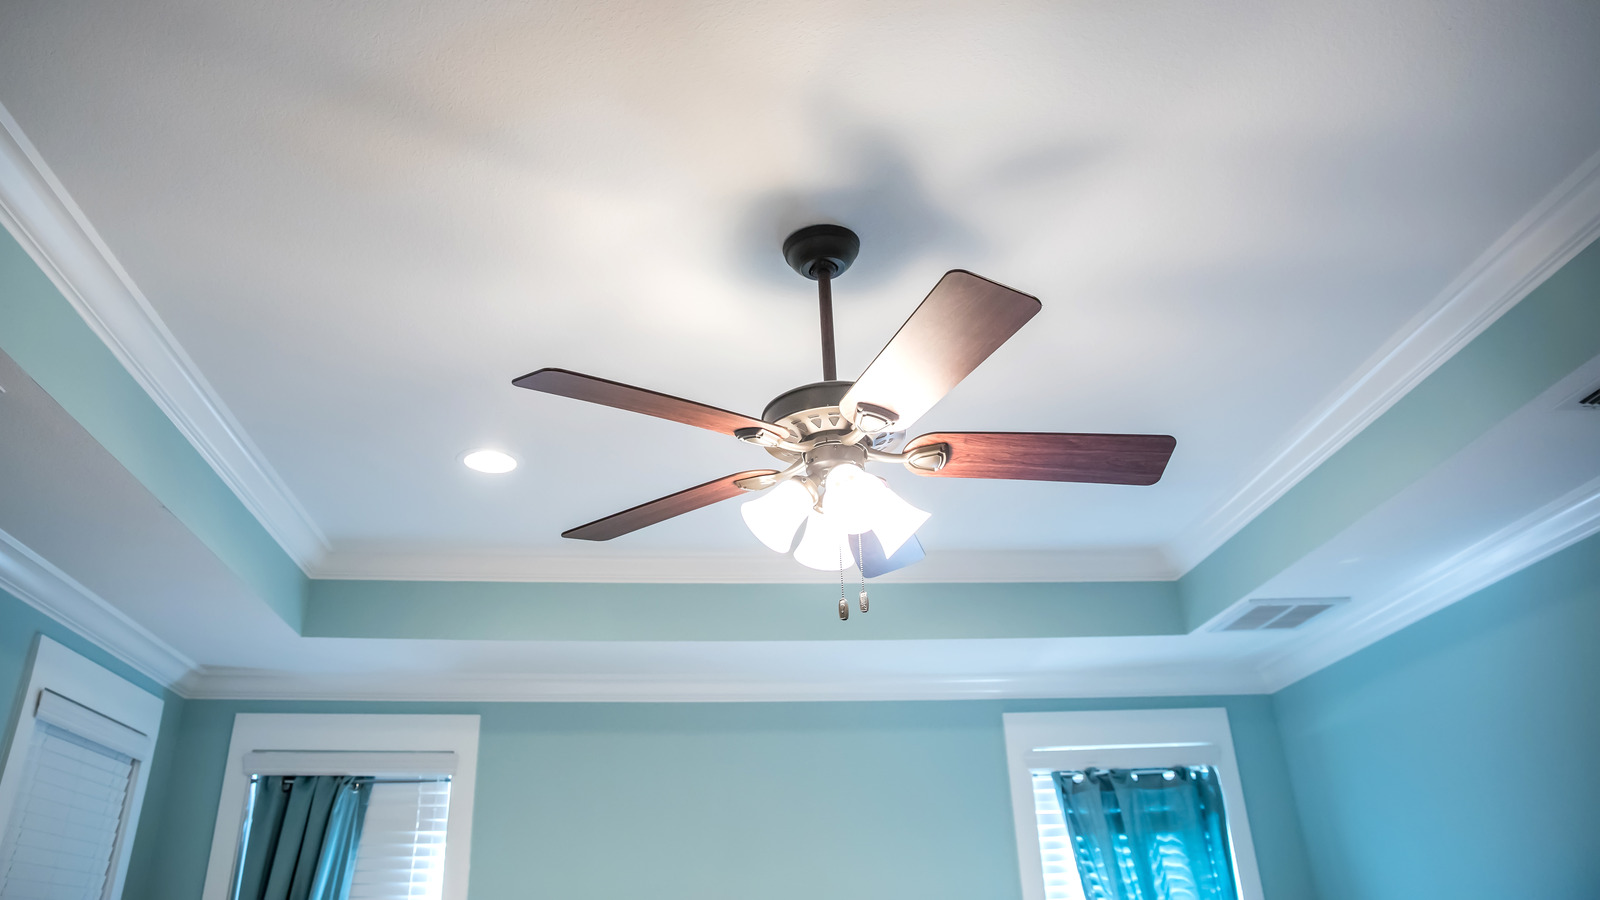 Tray ceilings: Dated or desirable?